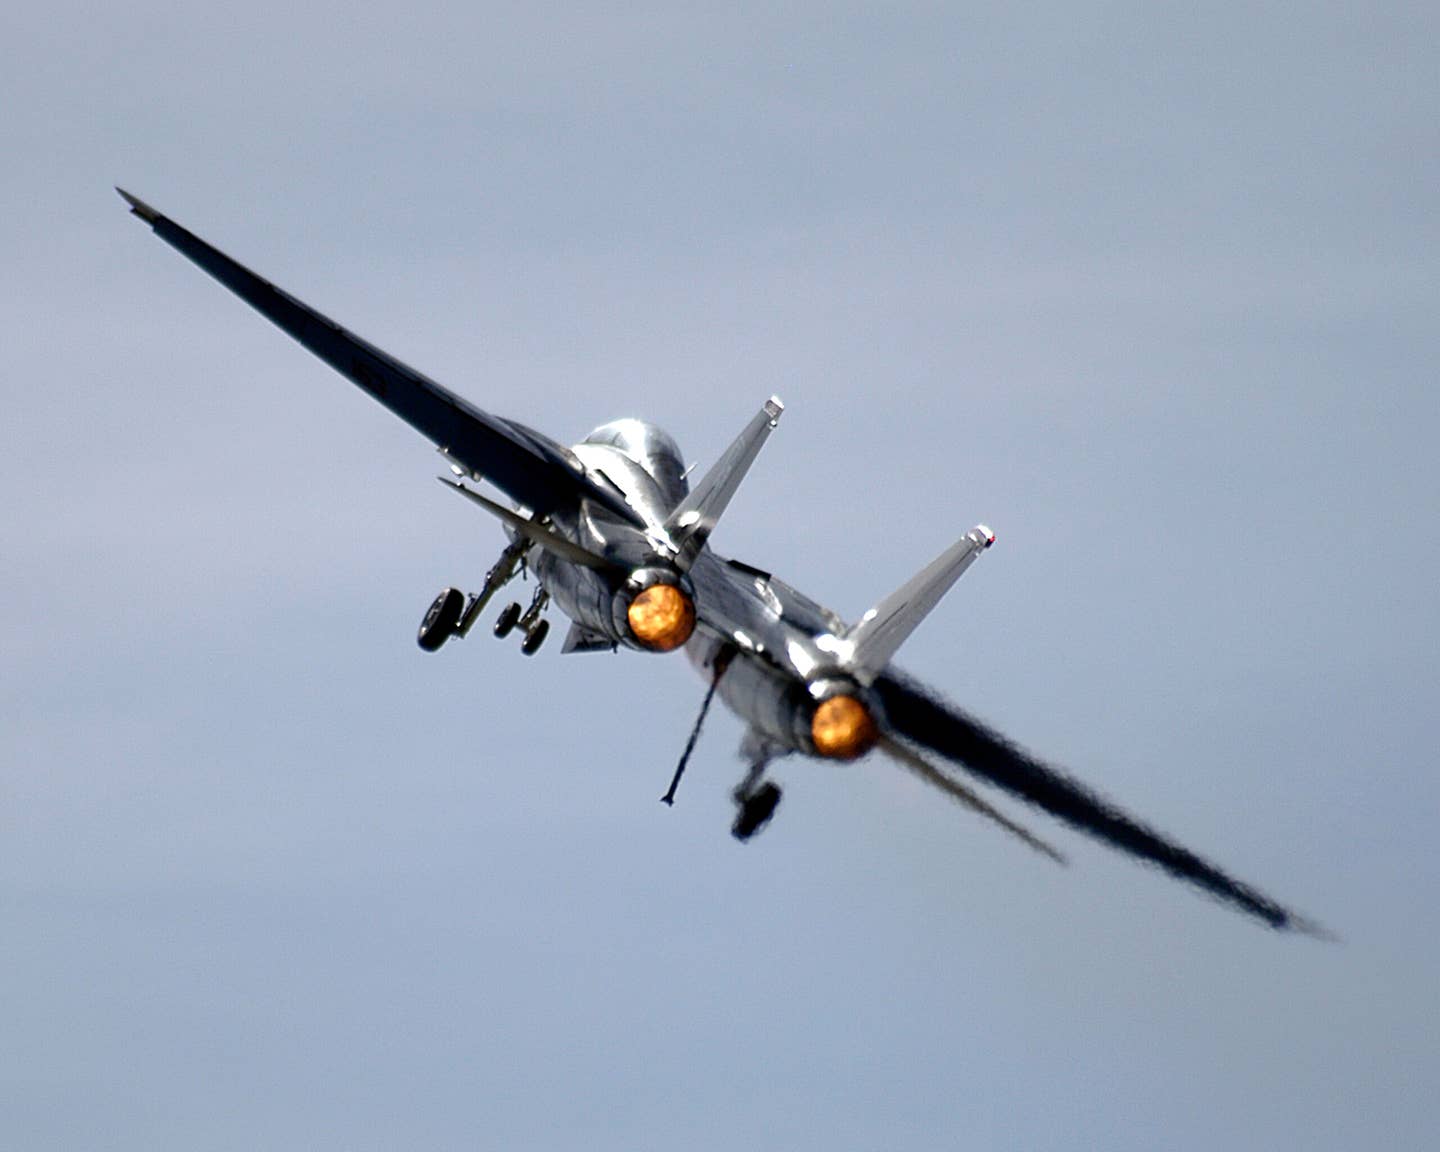 An F-14D Tomcat assigned to the "Grim Reapers" of Fighter Squadron One Zero One (VF-101), takes off in full afterburner after demonstrating a bolter at the 2004 "In Pursuit of Liberty," Naval Air Station Oceana Air Show..U.S. Navy photo by Photographer's Mate 2nd Class Daniel J. McLain